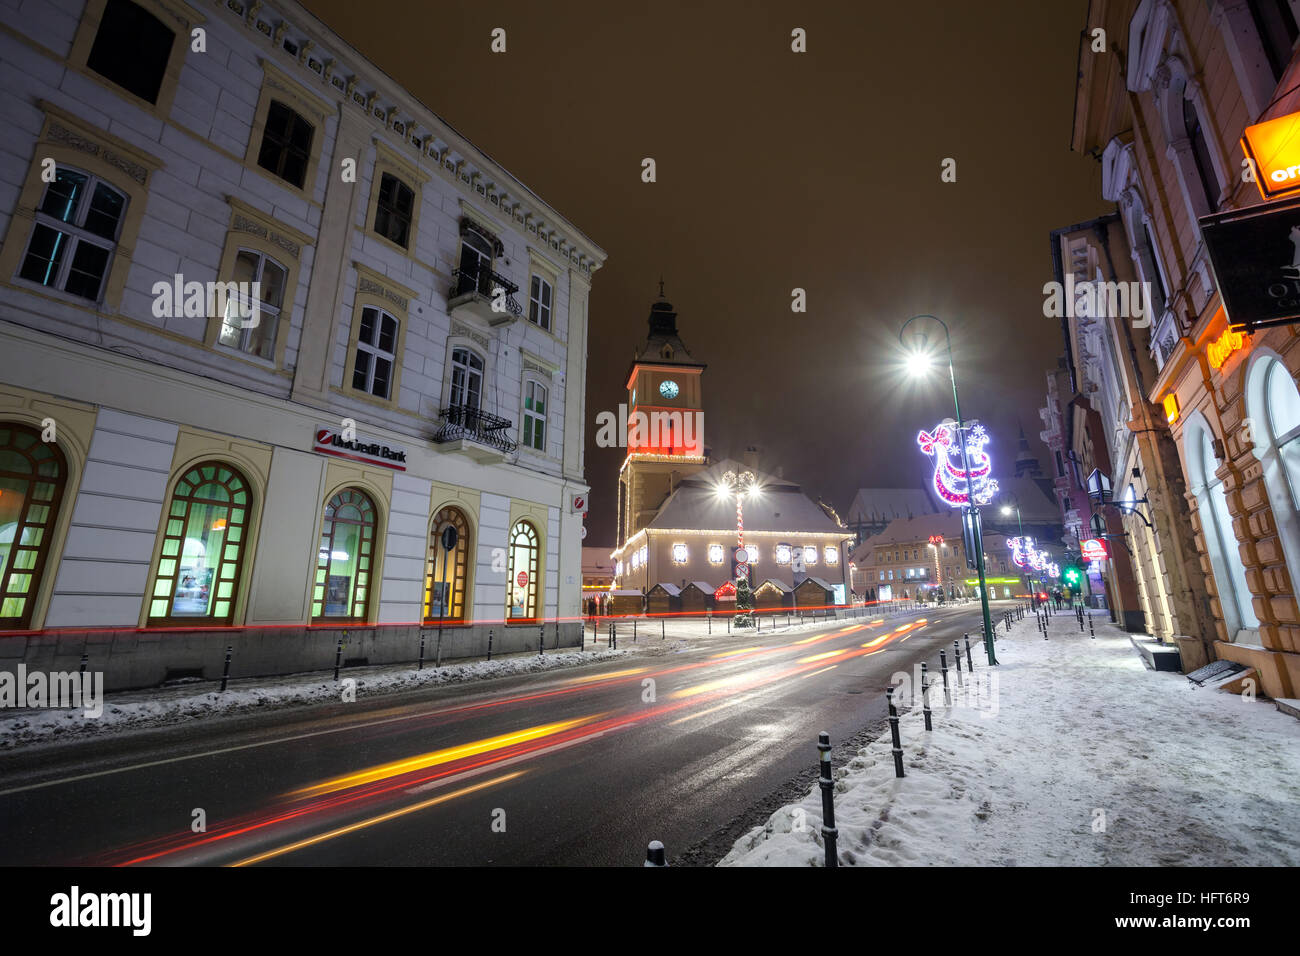 BRASOV, ROMANIA - 15 DECEMBER 2016: Brasov Council House night view decorated for Christmas and traditional winter market in the old town center Stock Photo